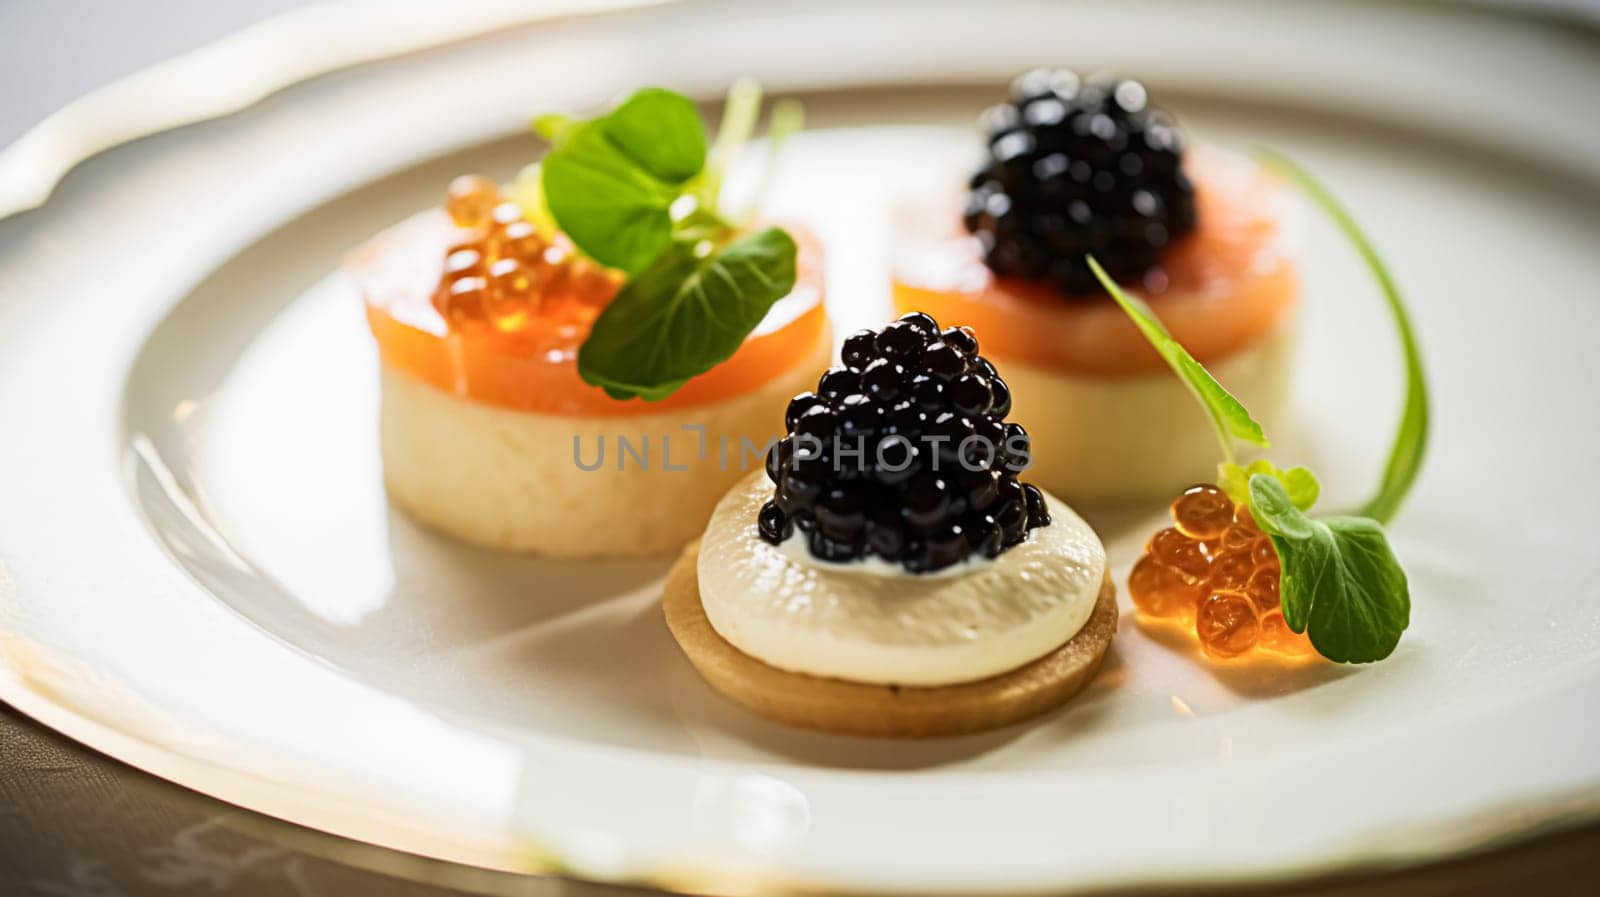 Food, hospitality and room service, starter appetisers with caviar as exquisite cuisine in hotel restaurant a la carte menu, culinary art and fine dining experience